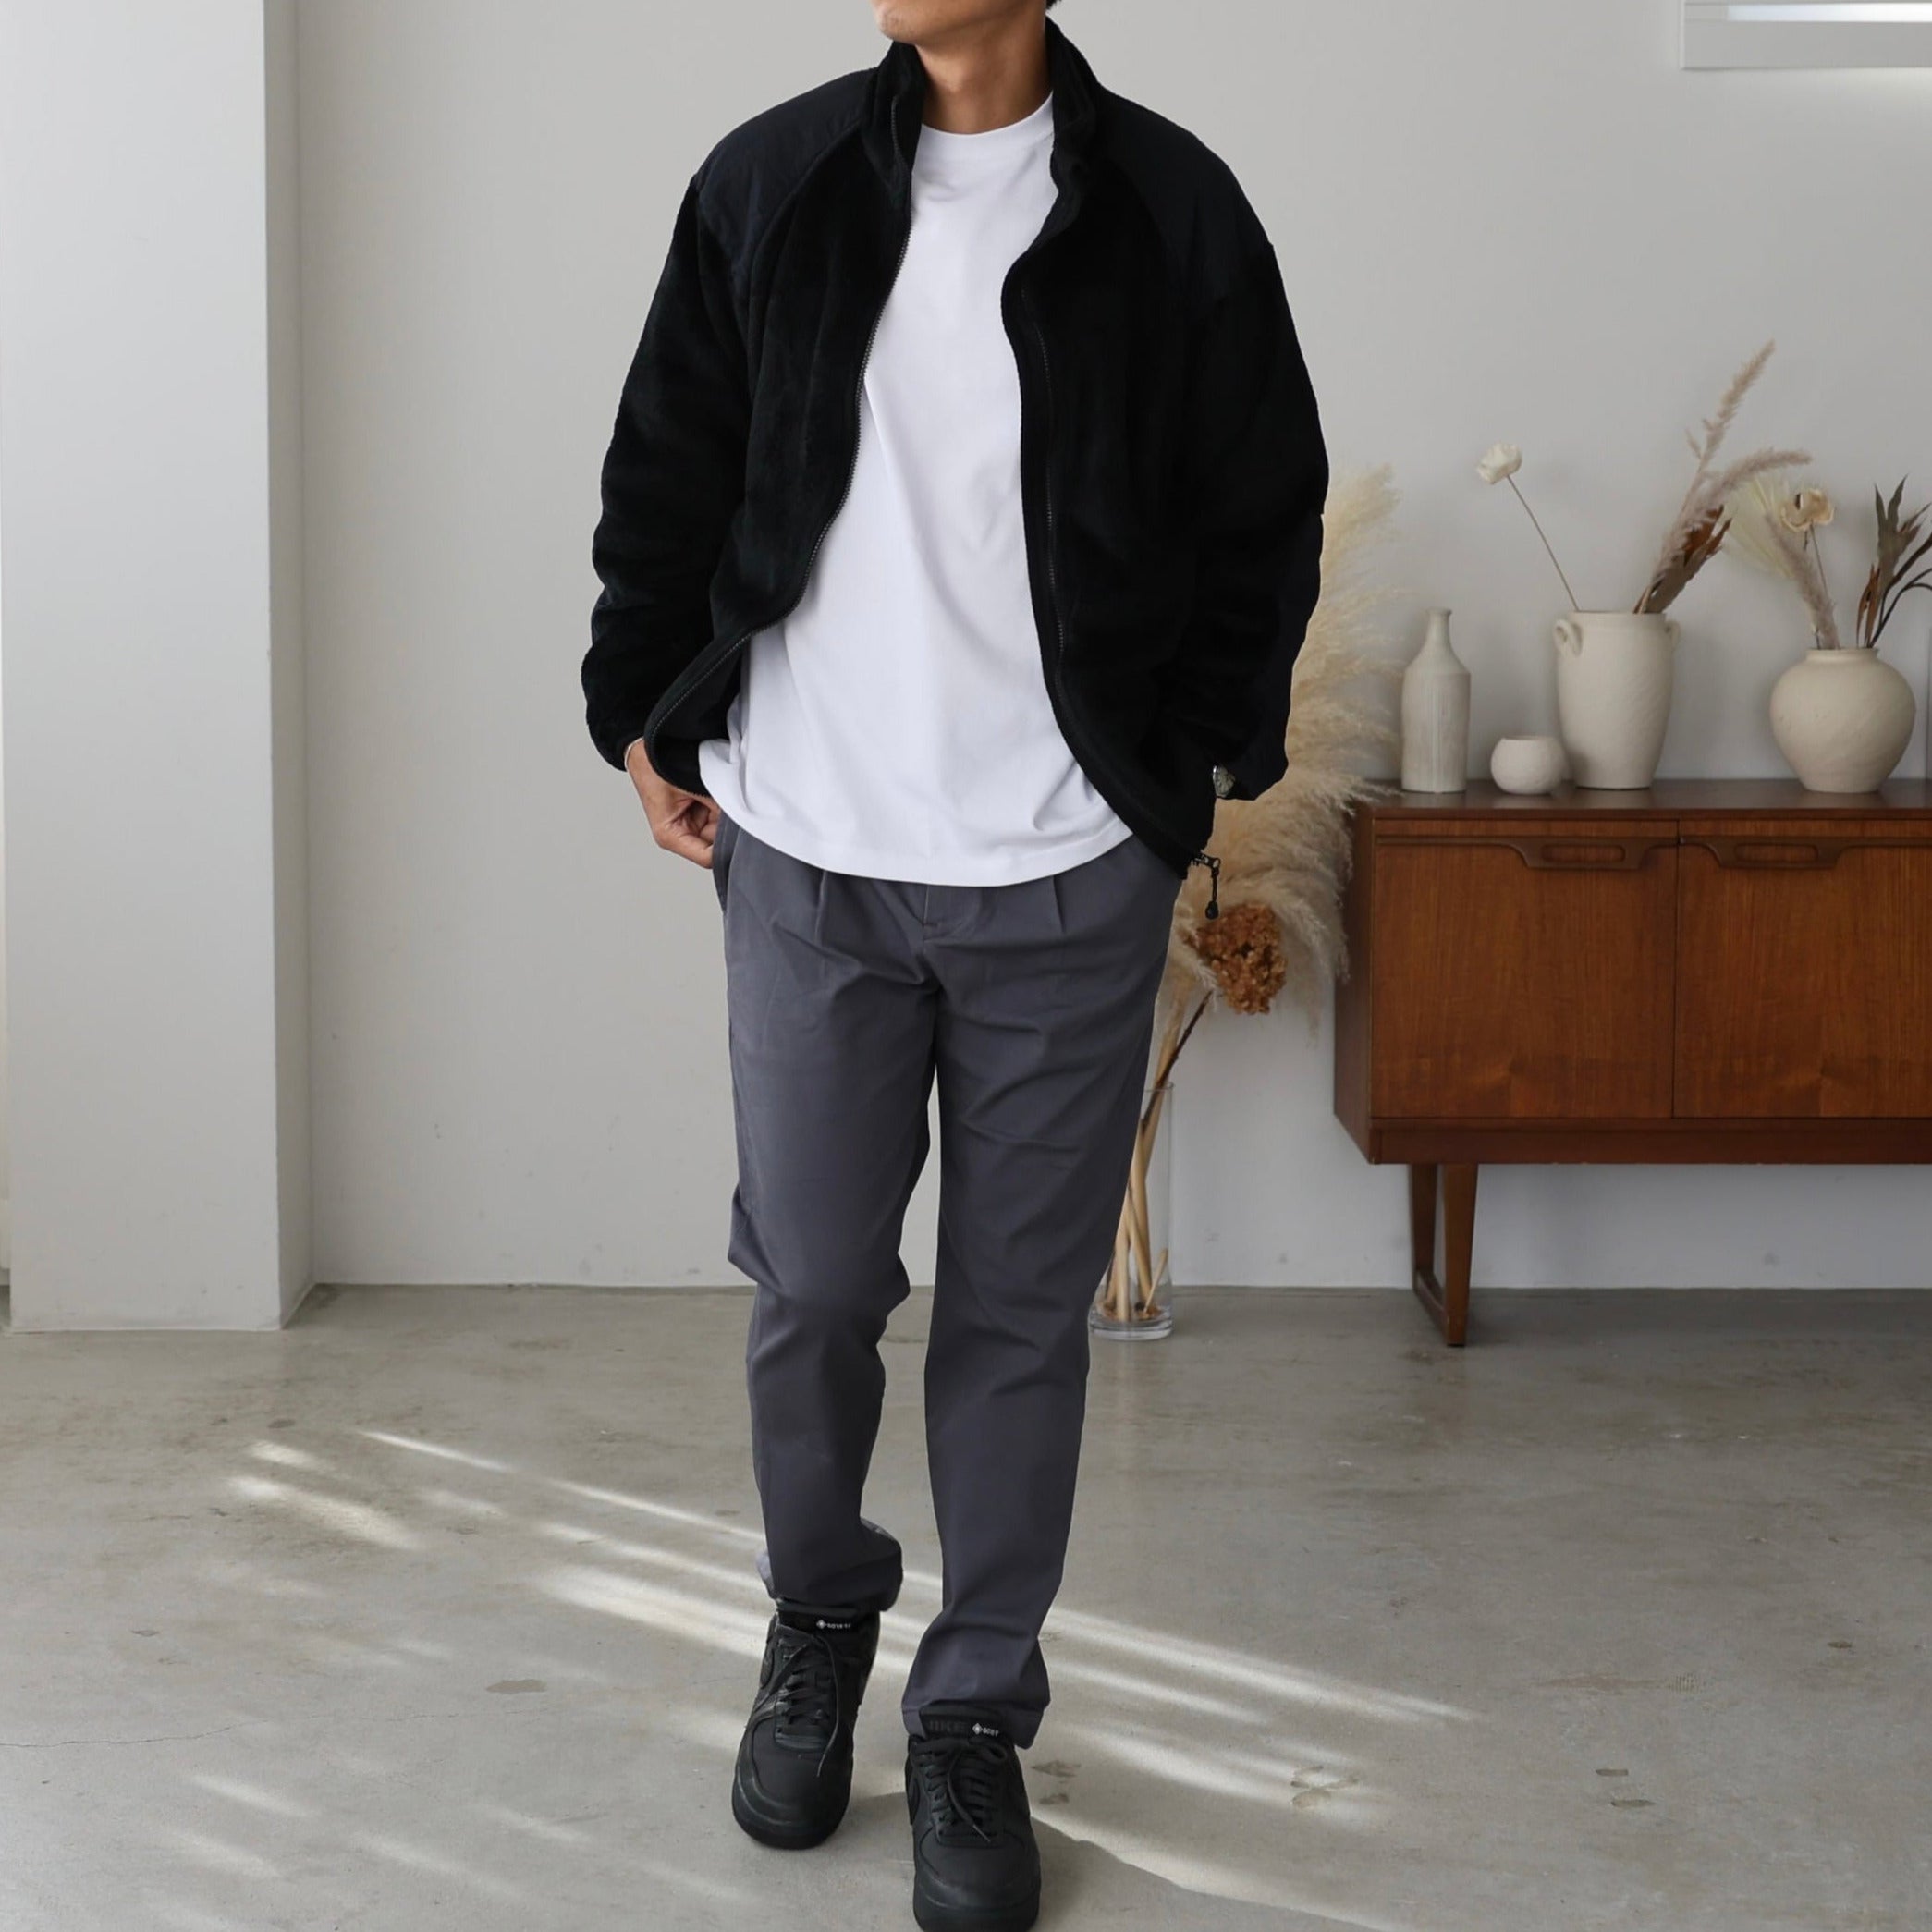 Someday, the ultimate gray pants ~ Pants that will make black outerwear the coolest ~